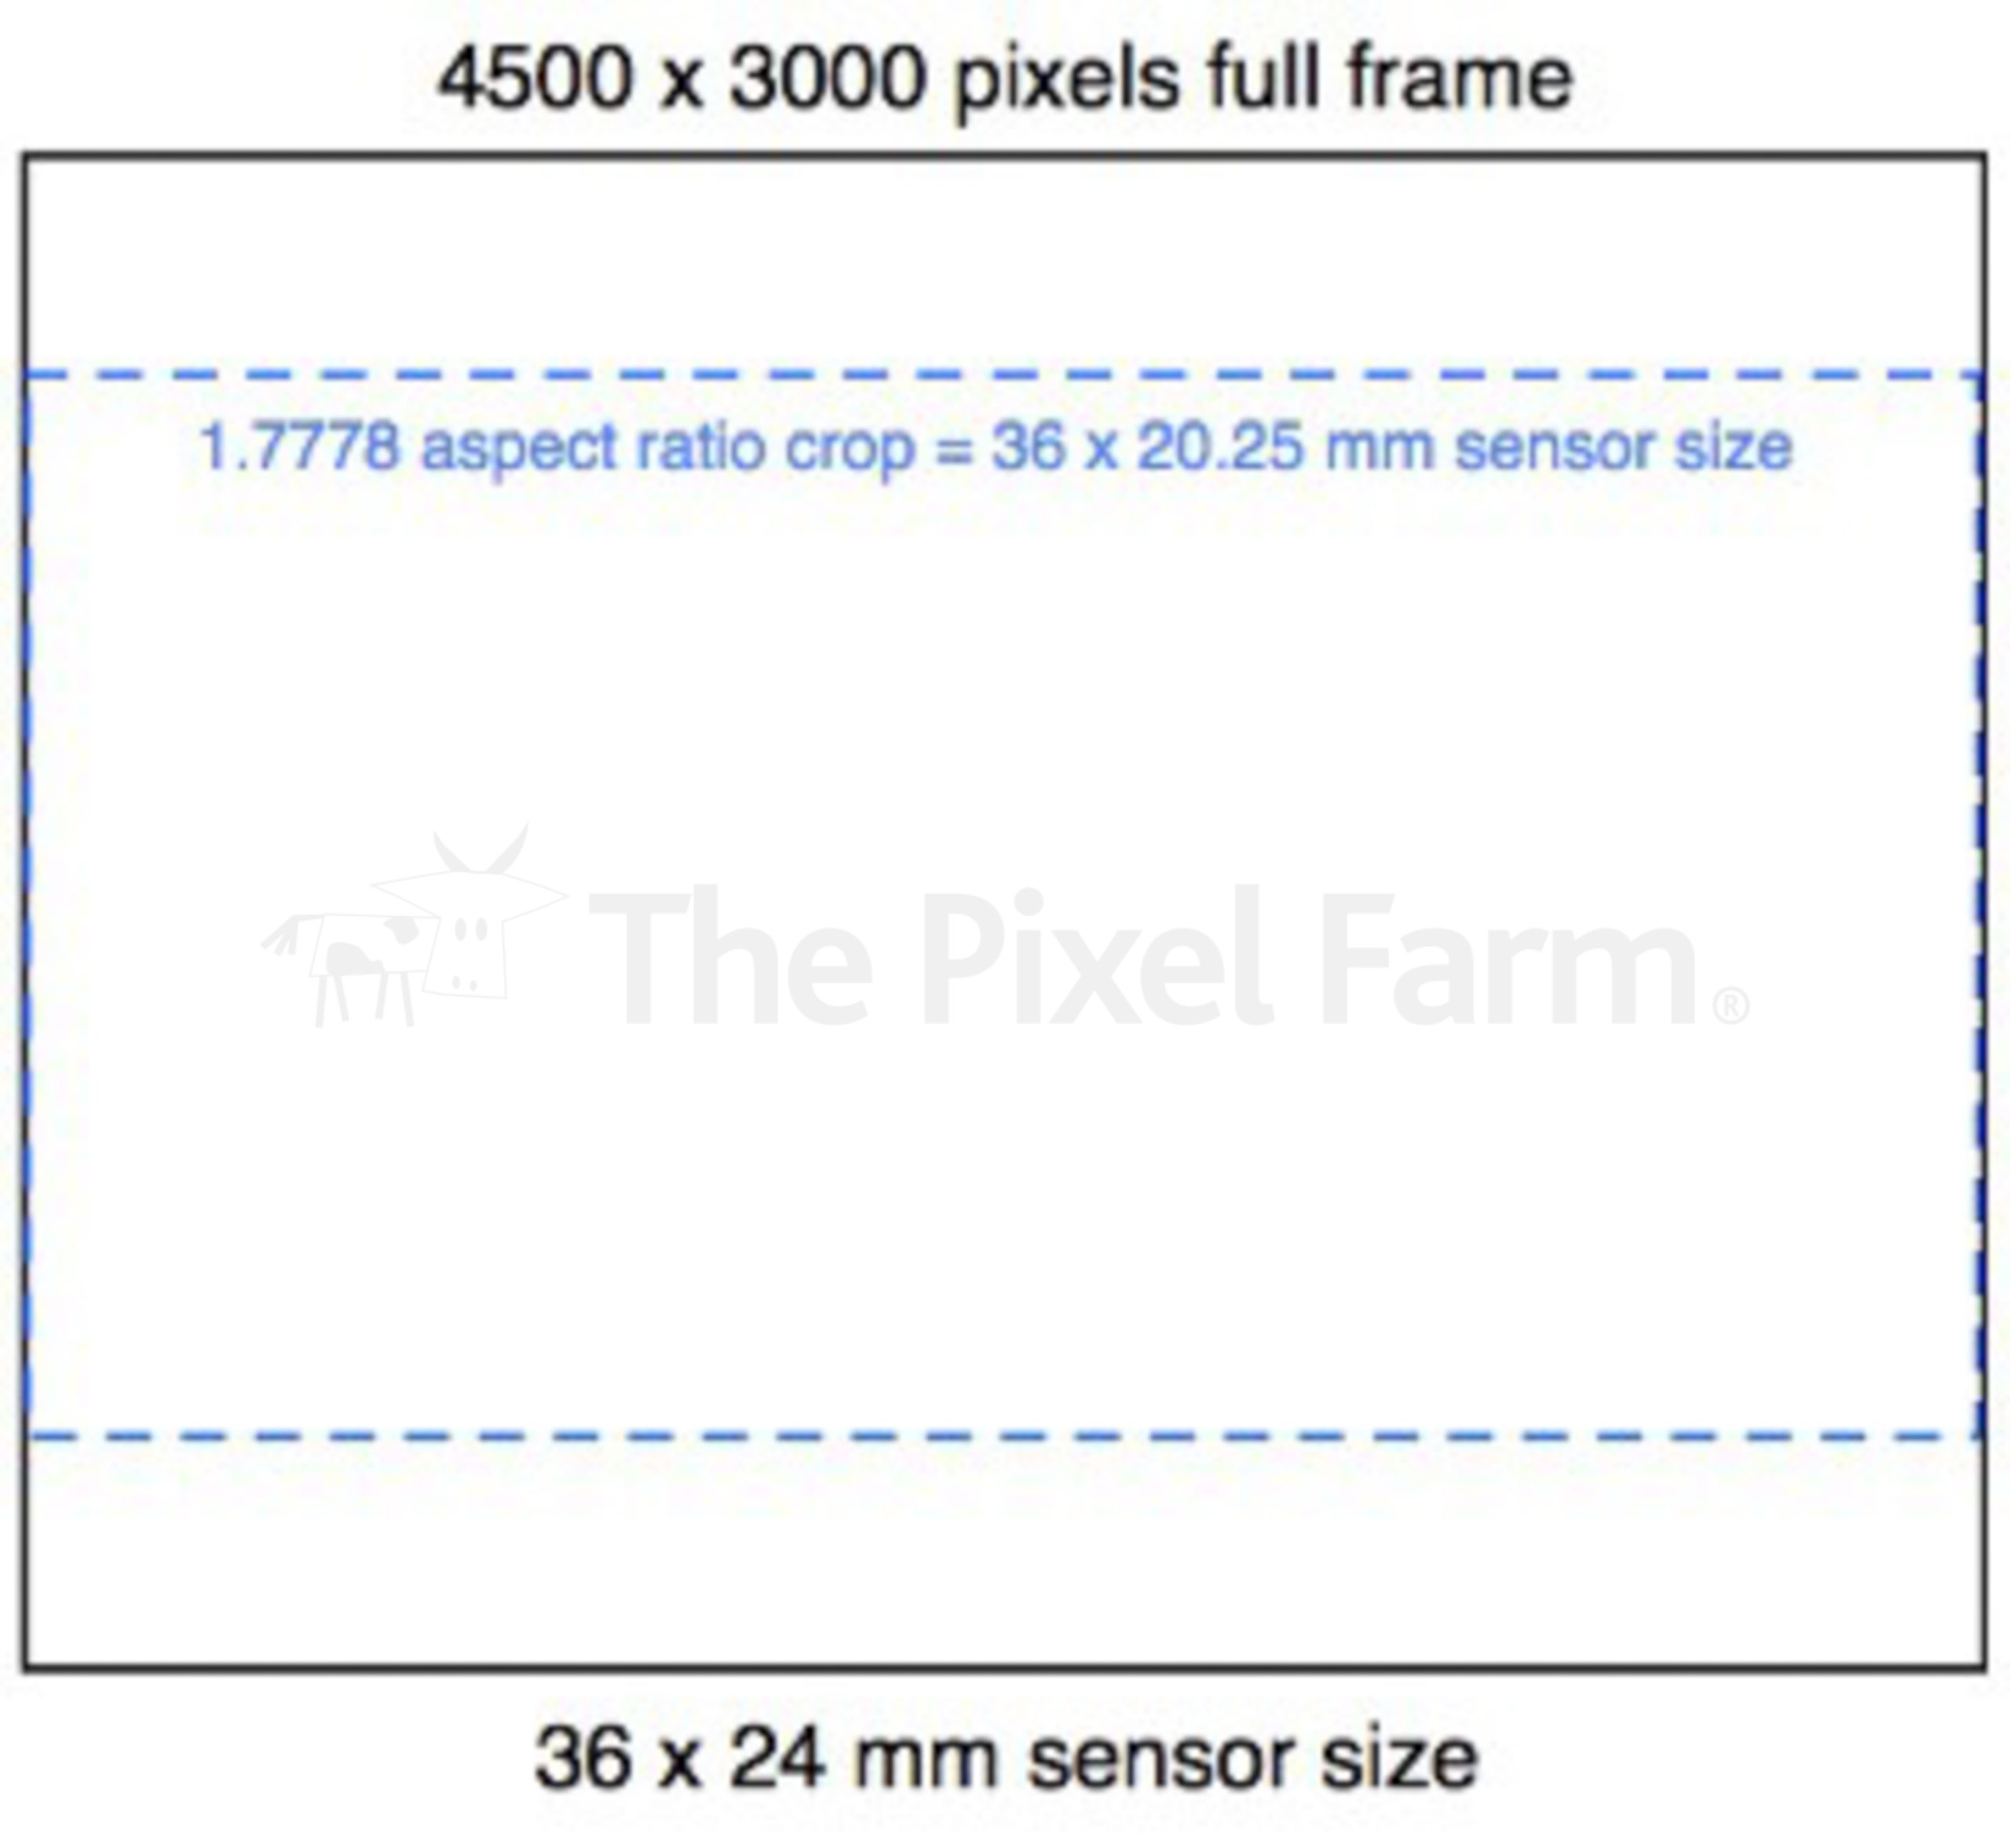 cropped sensor for video